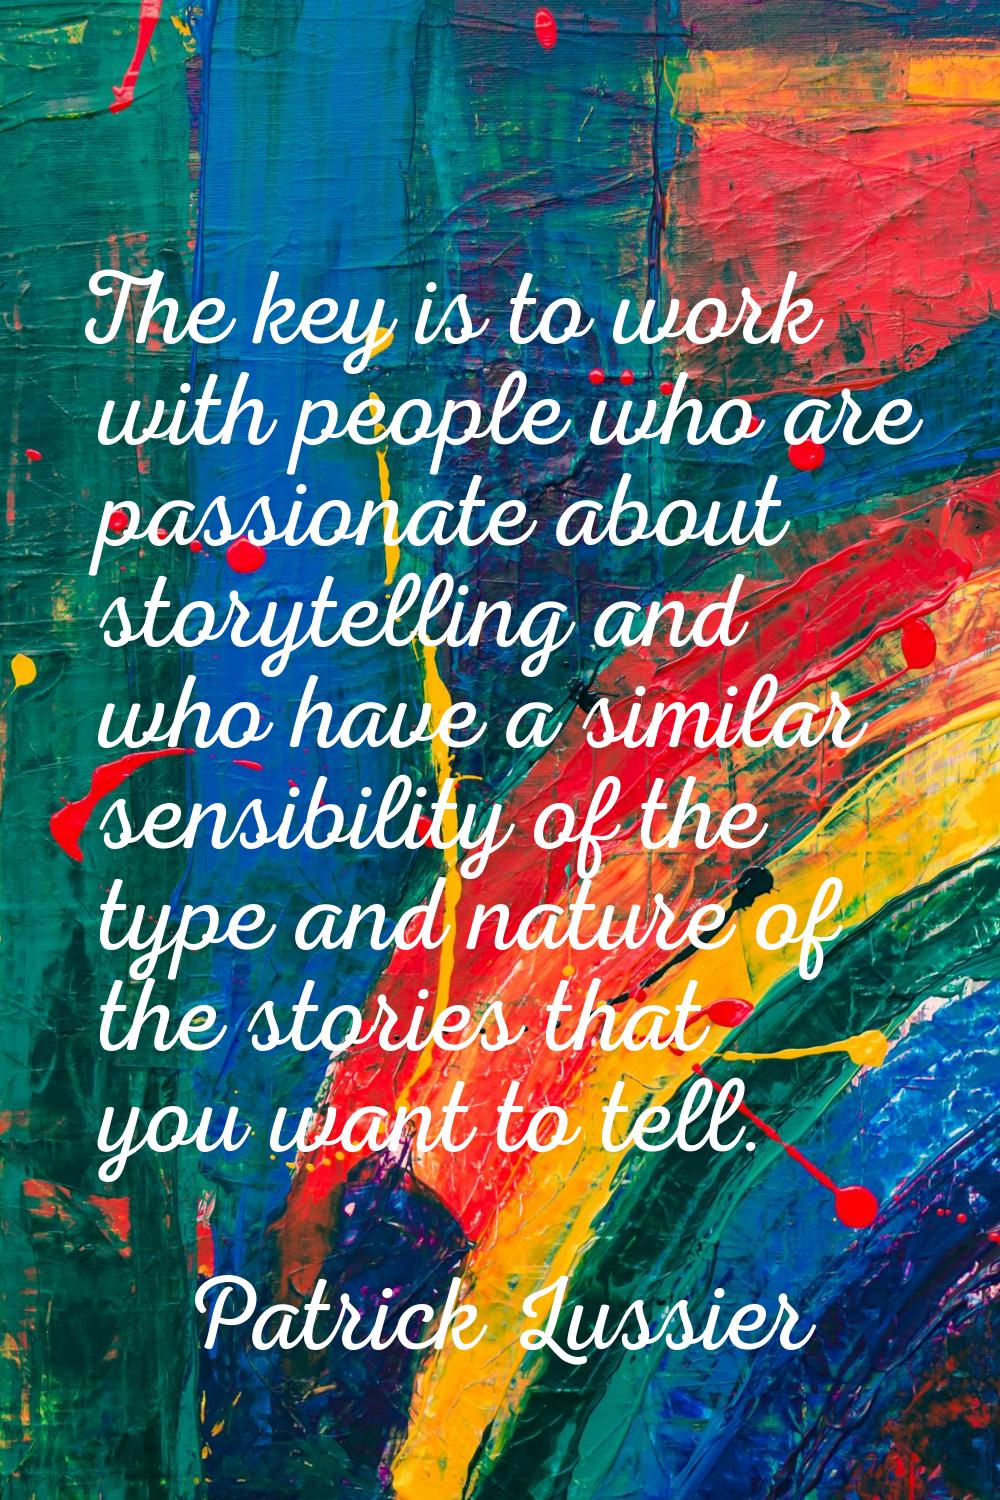 The key is to work with people who are passionate about storytelling and who have a similar sensibi